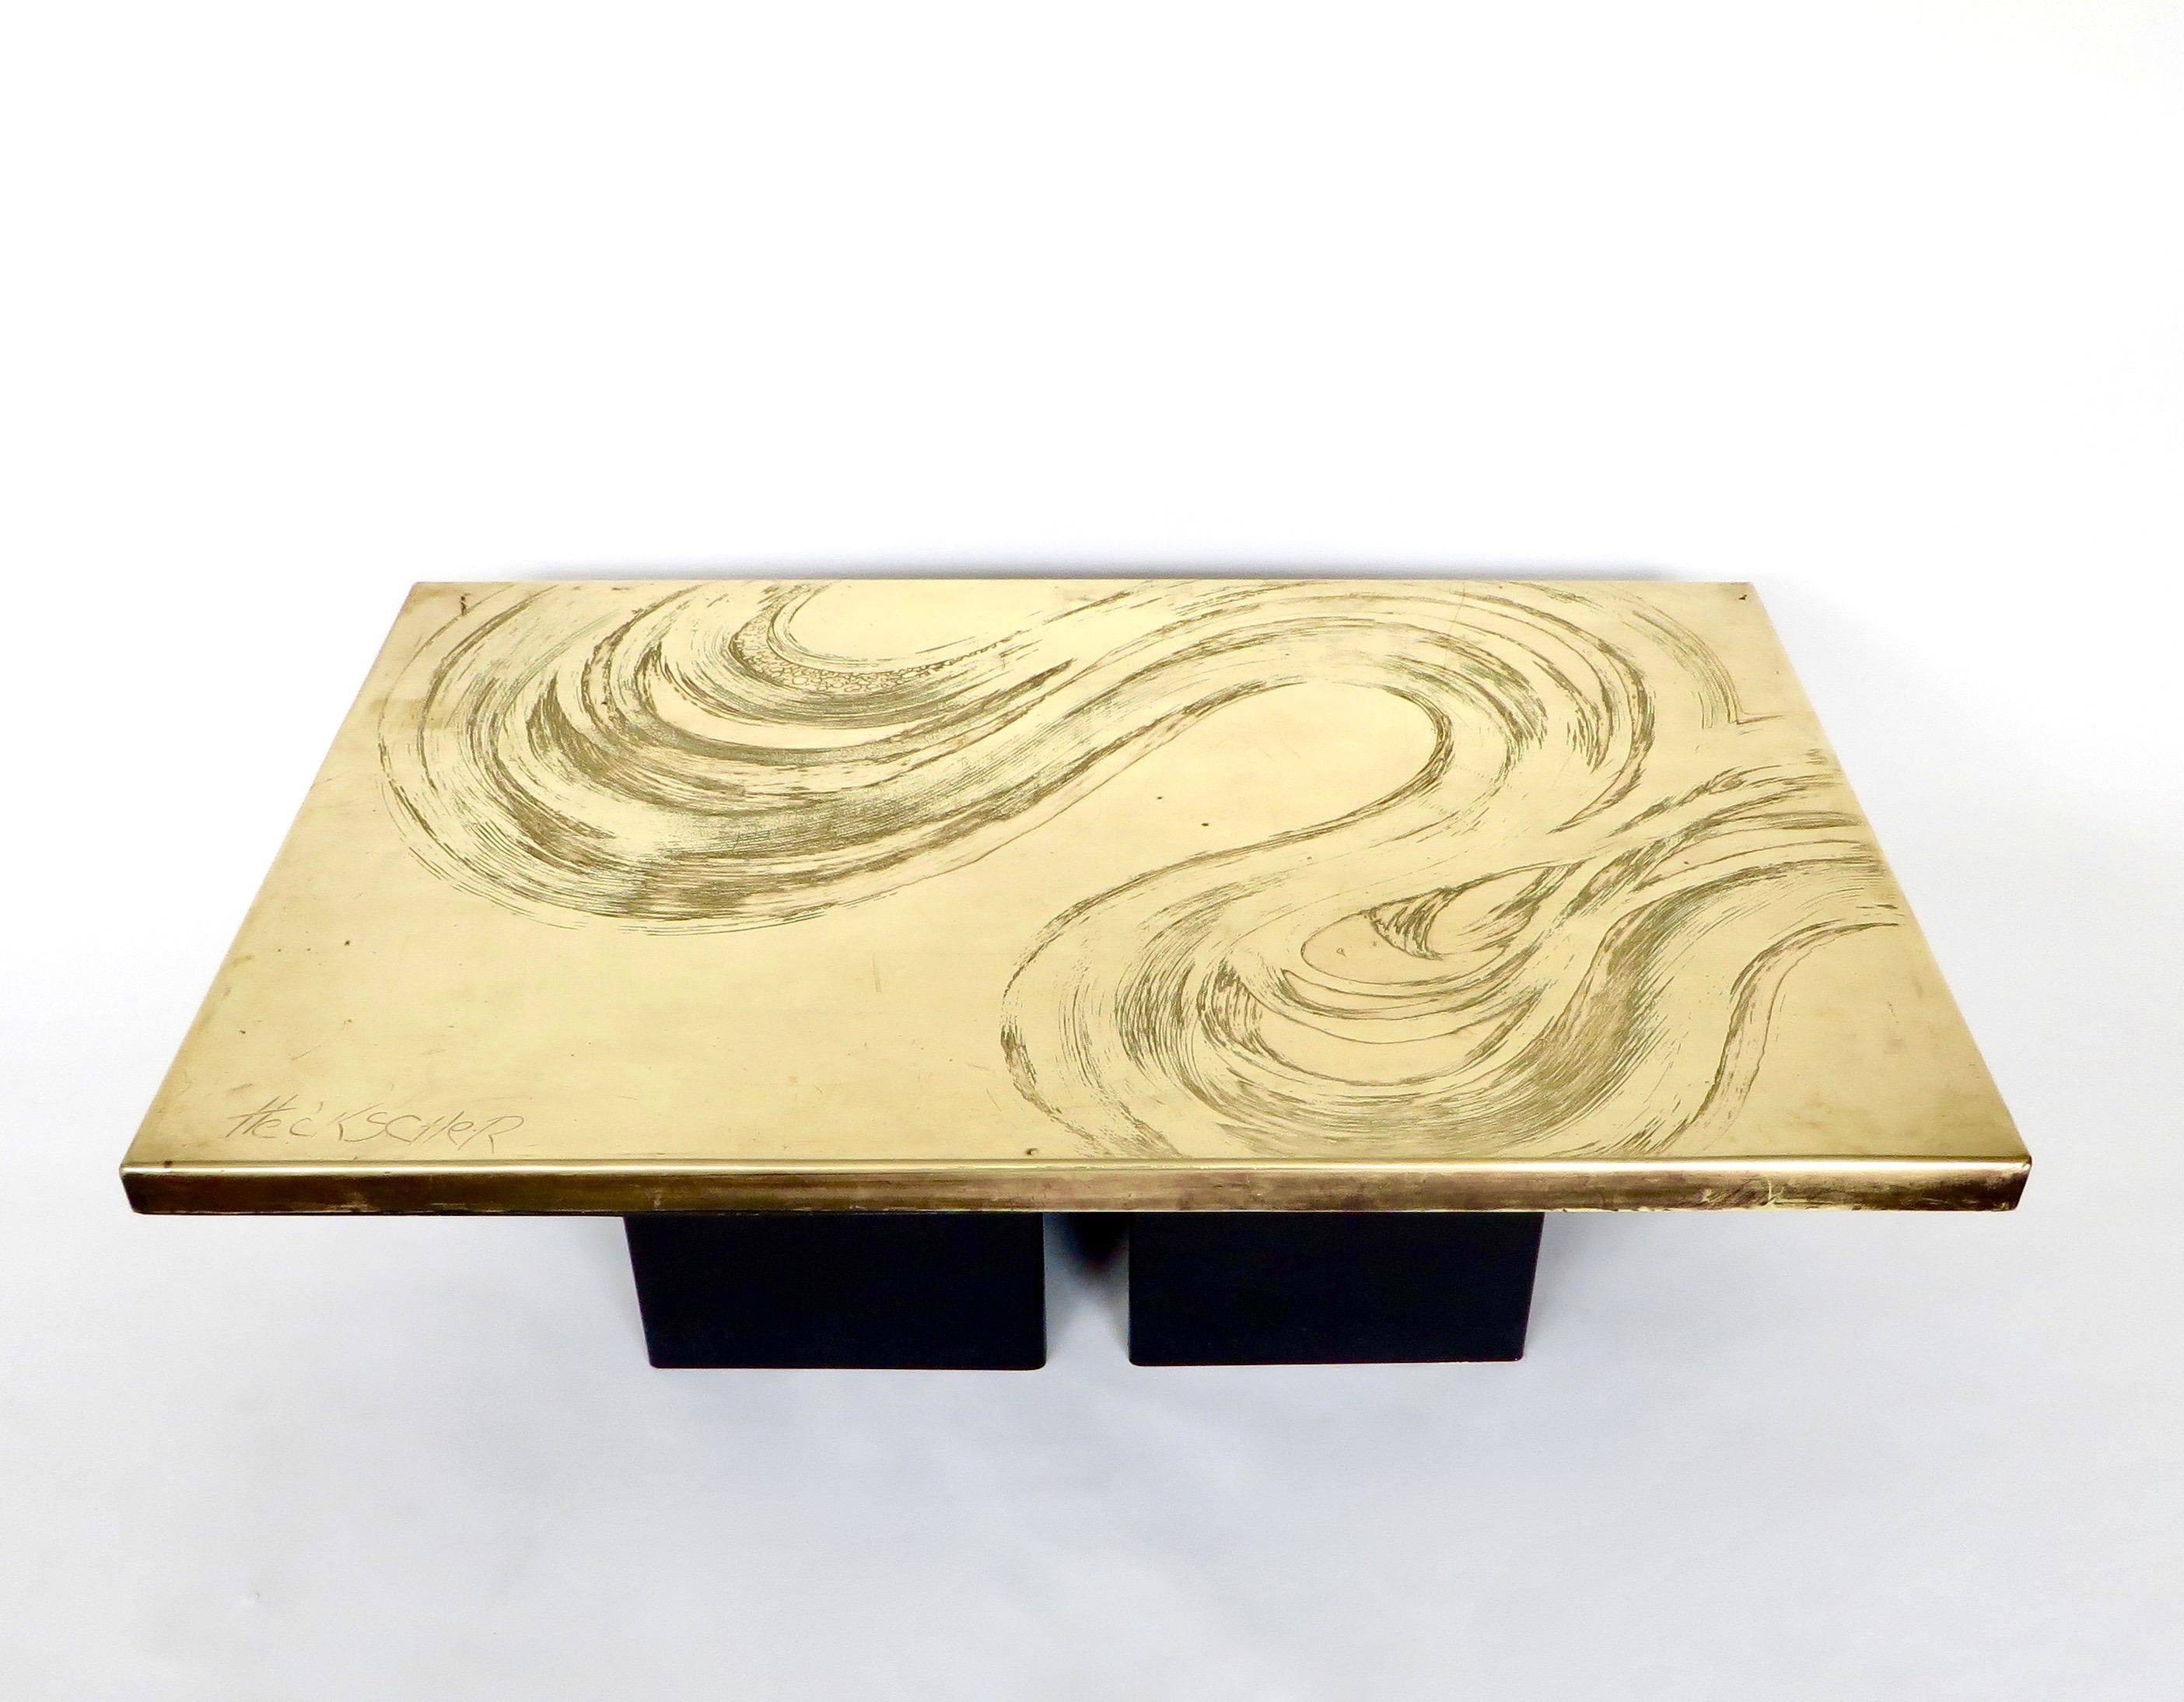 A vintage Belgian etched brass coffee table on two black enameled metal pedestals. The pattern is like a wave or cloud with varying deeply etched lines and drops of patinated brass. Newly polished with age appropriate wear to the surface. The etched